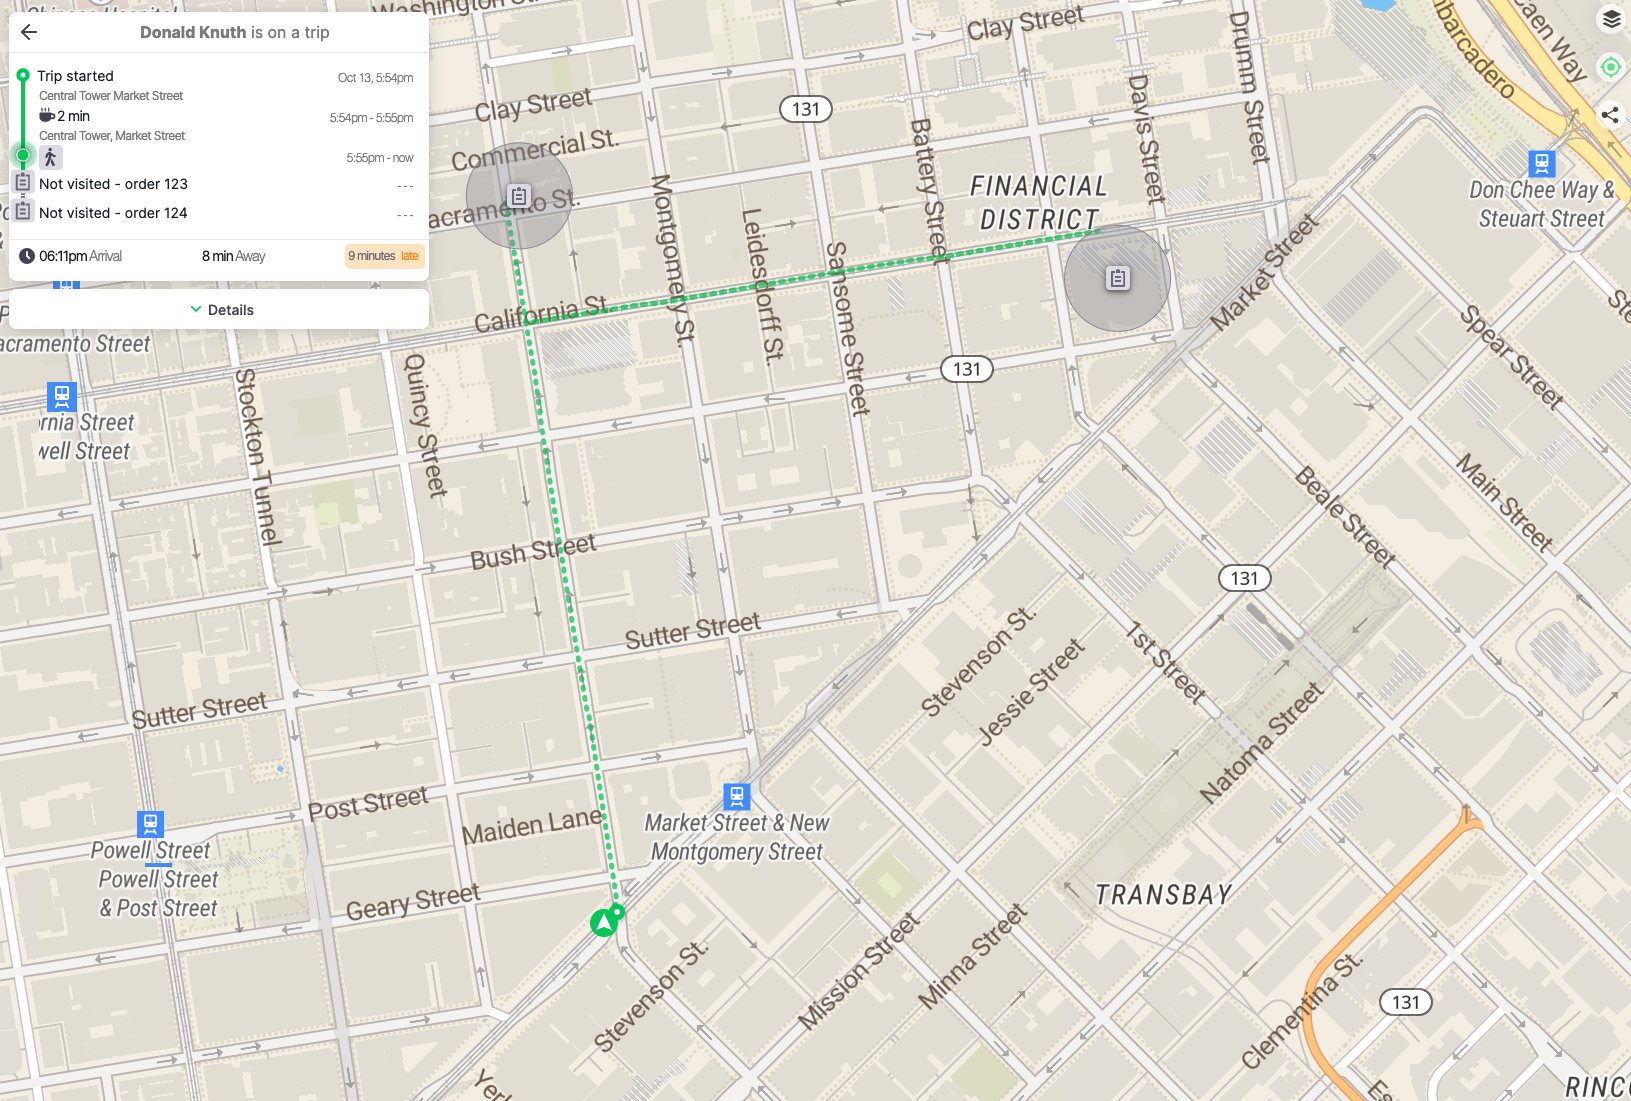 On-time route embed screenshot